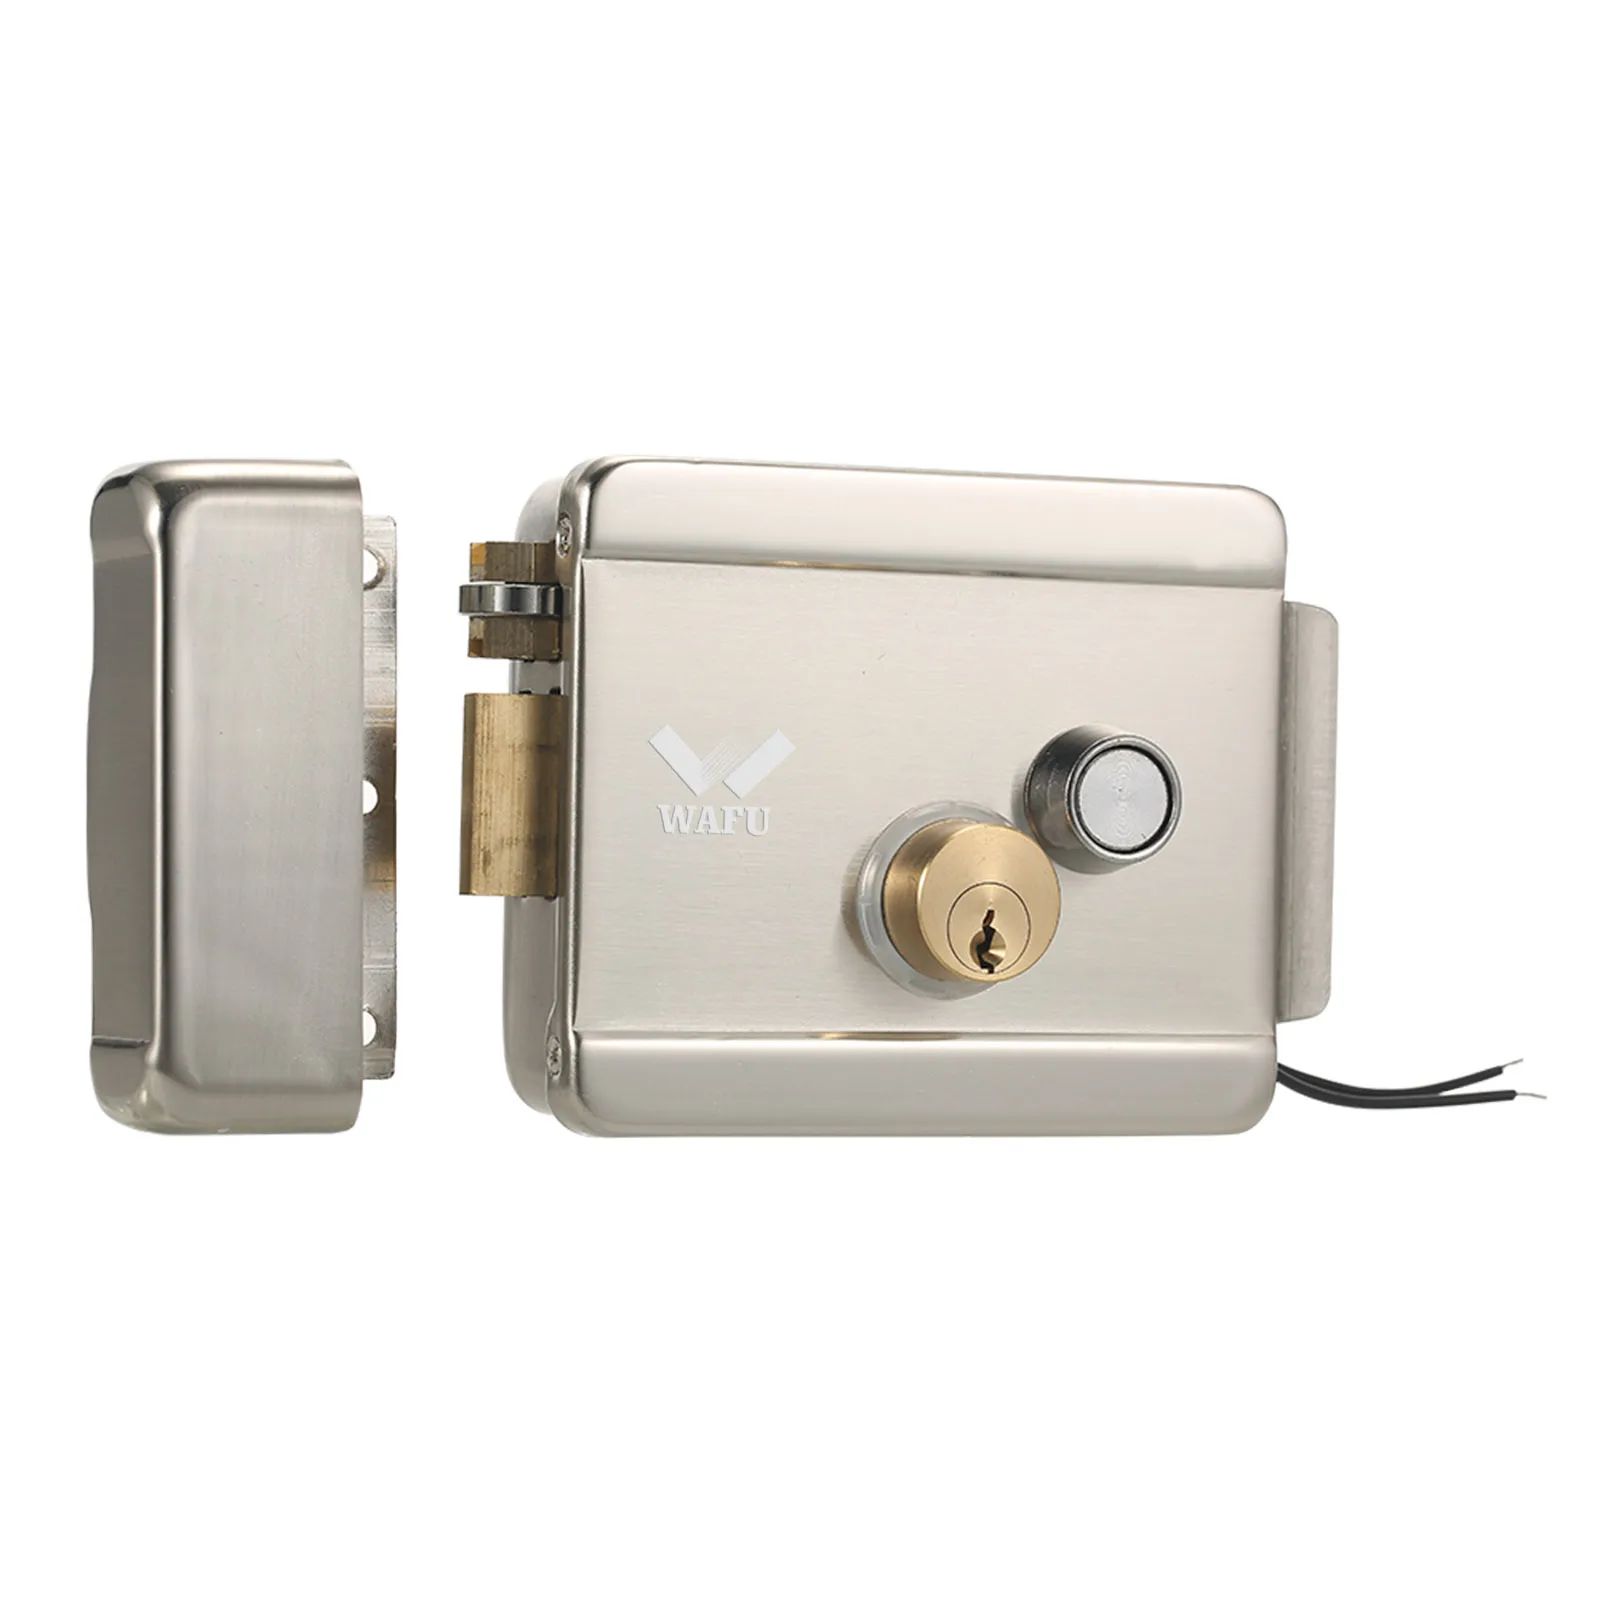 WAFU Smart Electric Gate Door Lock Secure Electric Metallic Lock Electronic Door Lock Door Access Control for Home Apartment